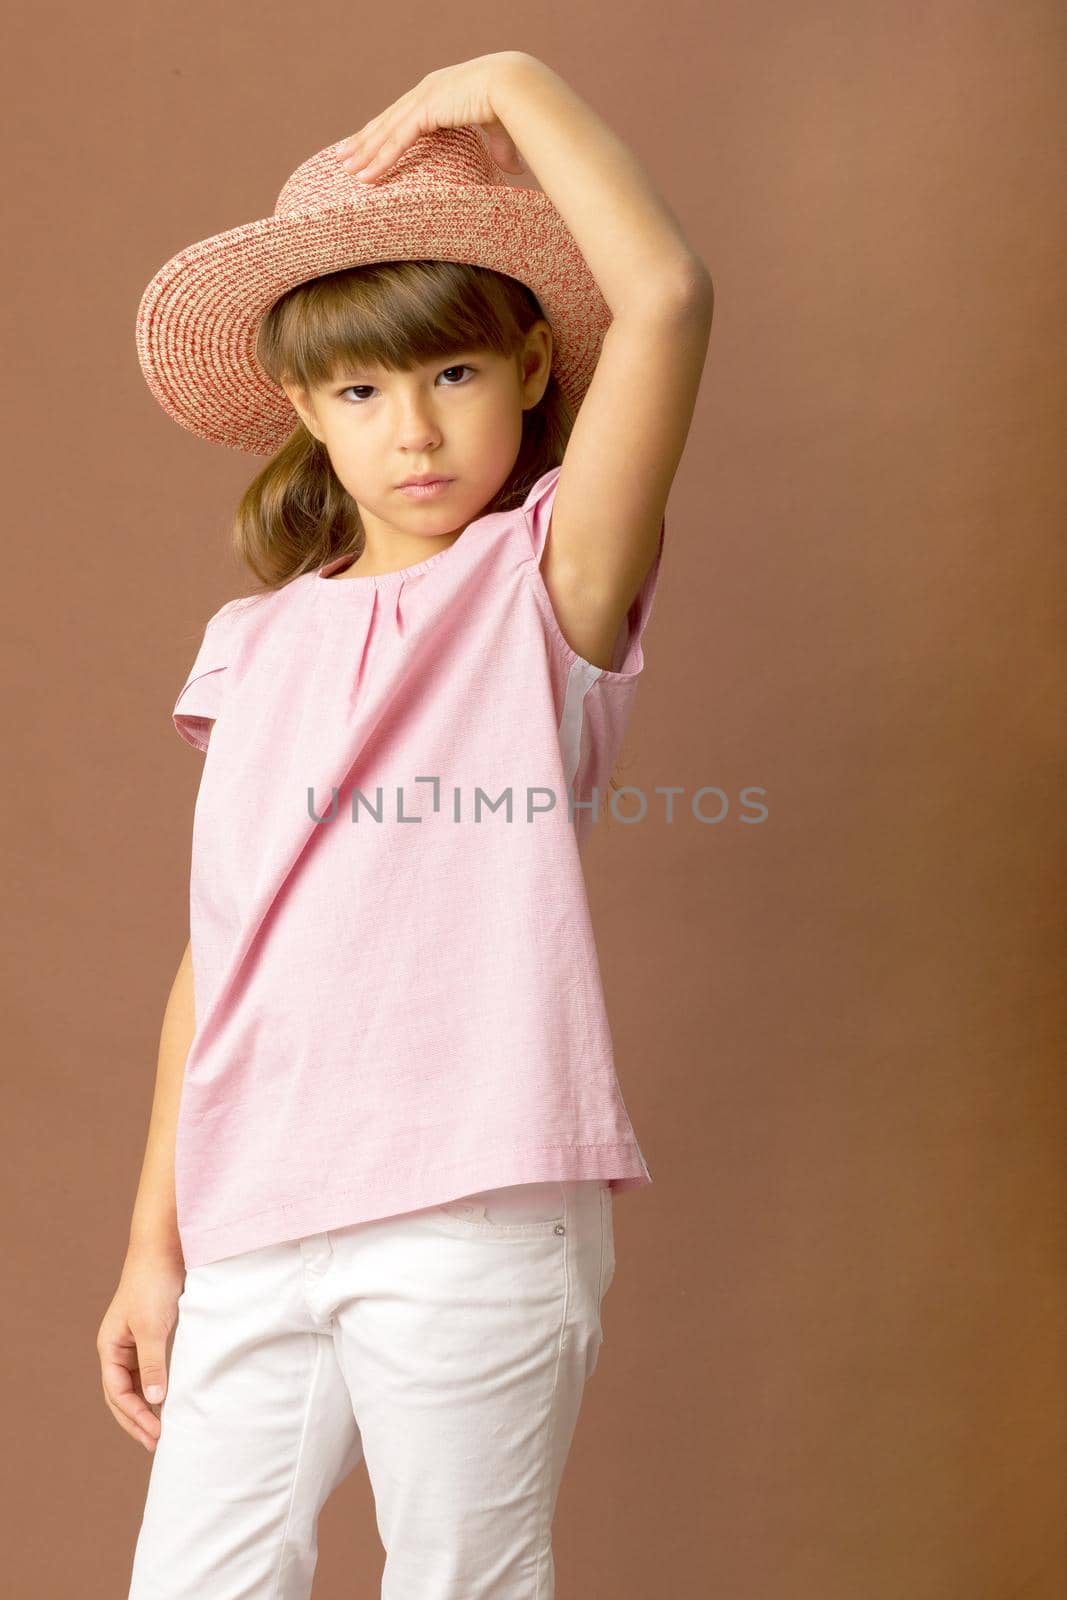 Adorable girl touching her straw hat. Child in pink t-shirt, white pants and straw hat posing on brown background in studio. Full length portrait of cute preteen girl looking seriously at camera